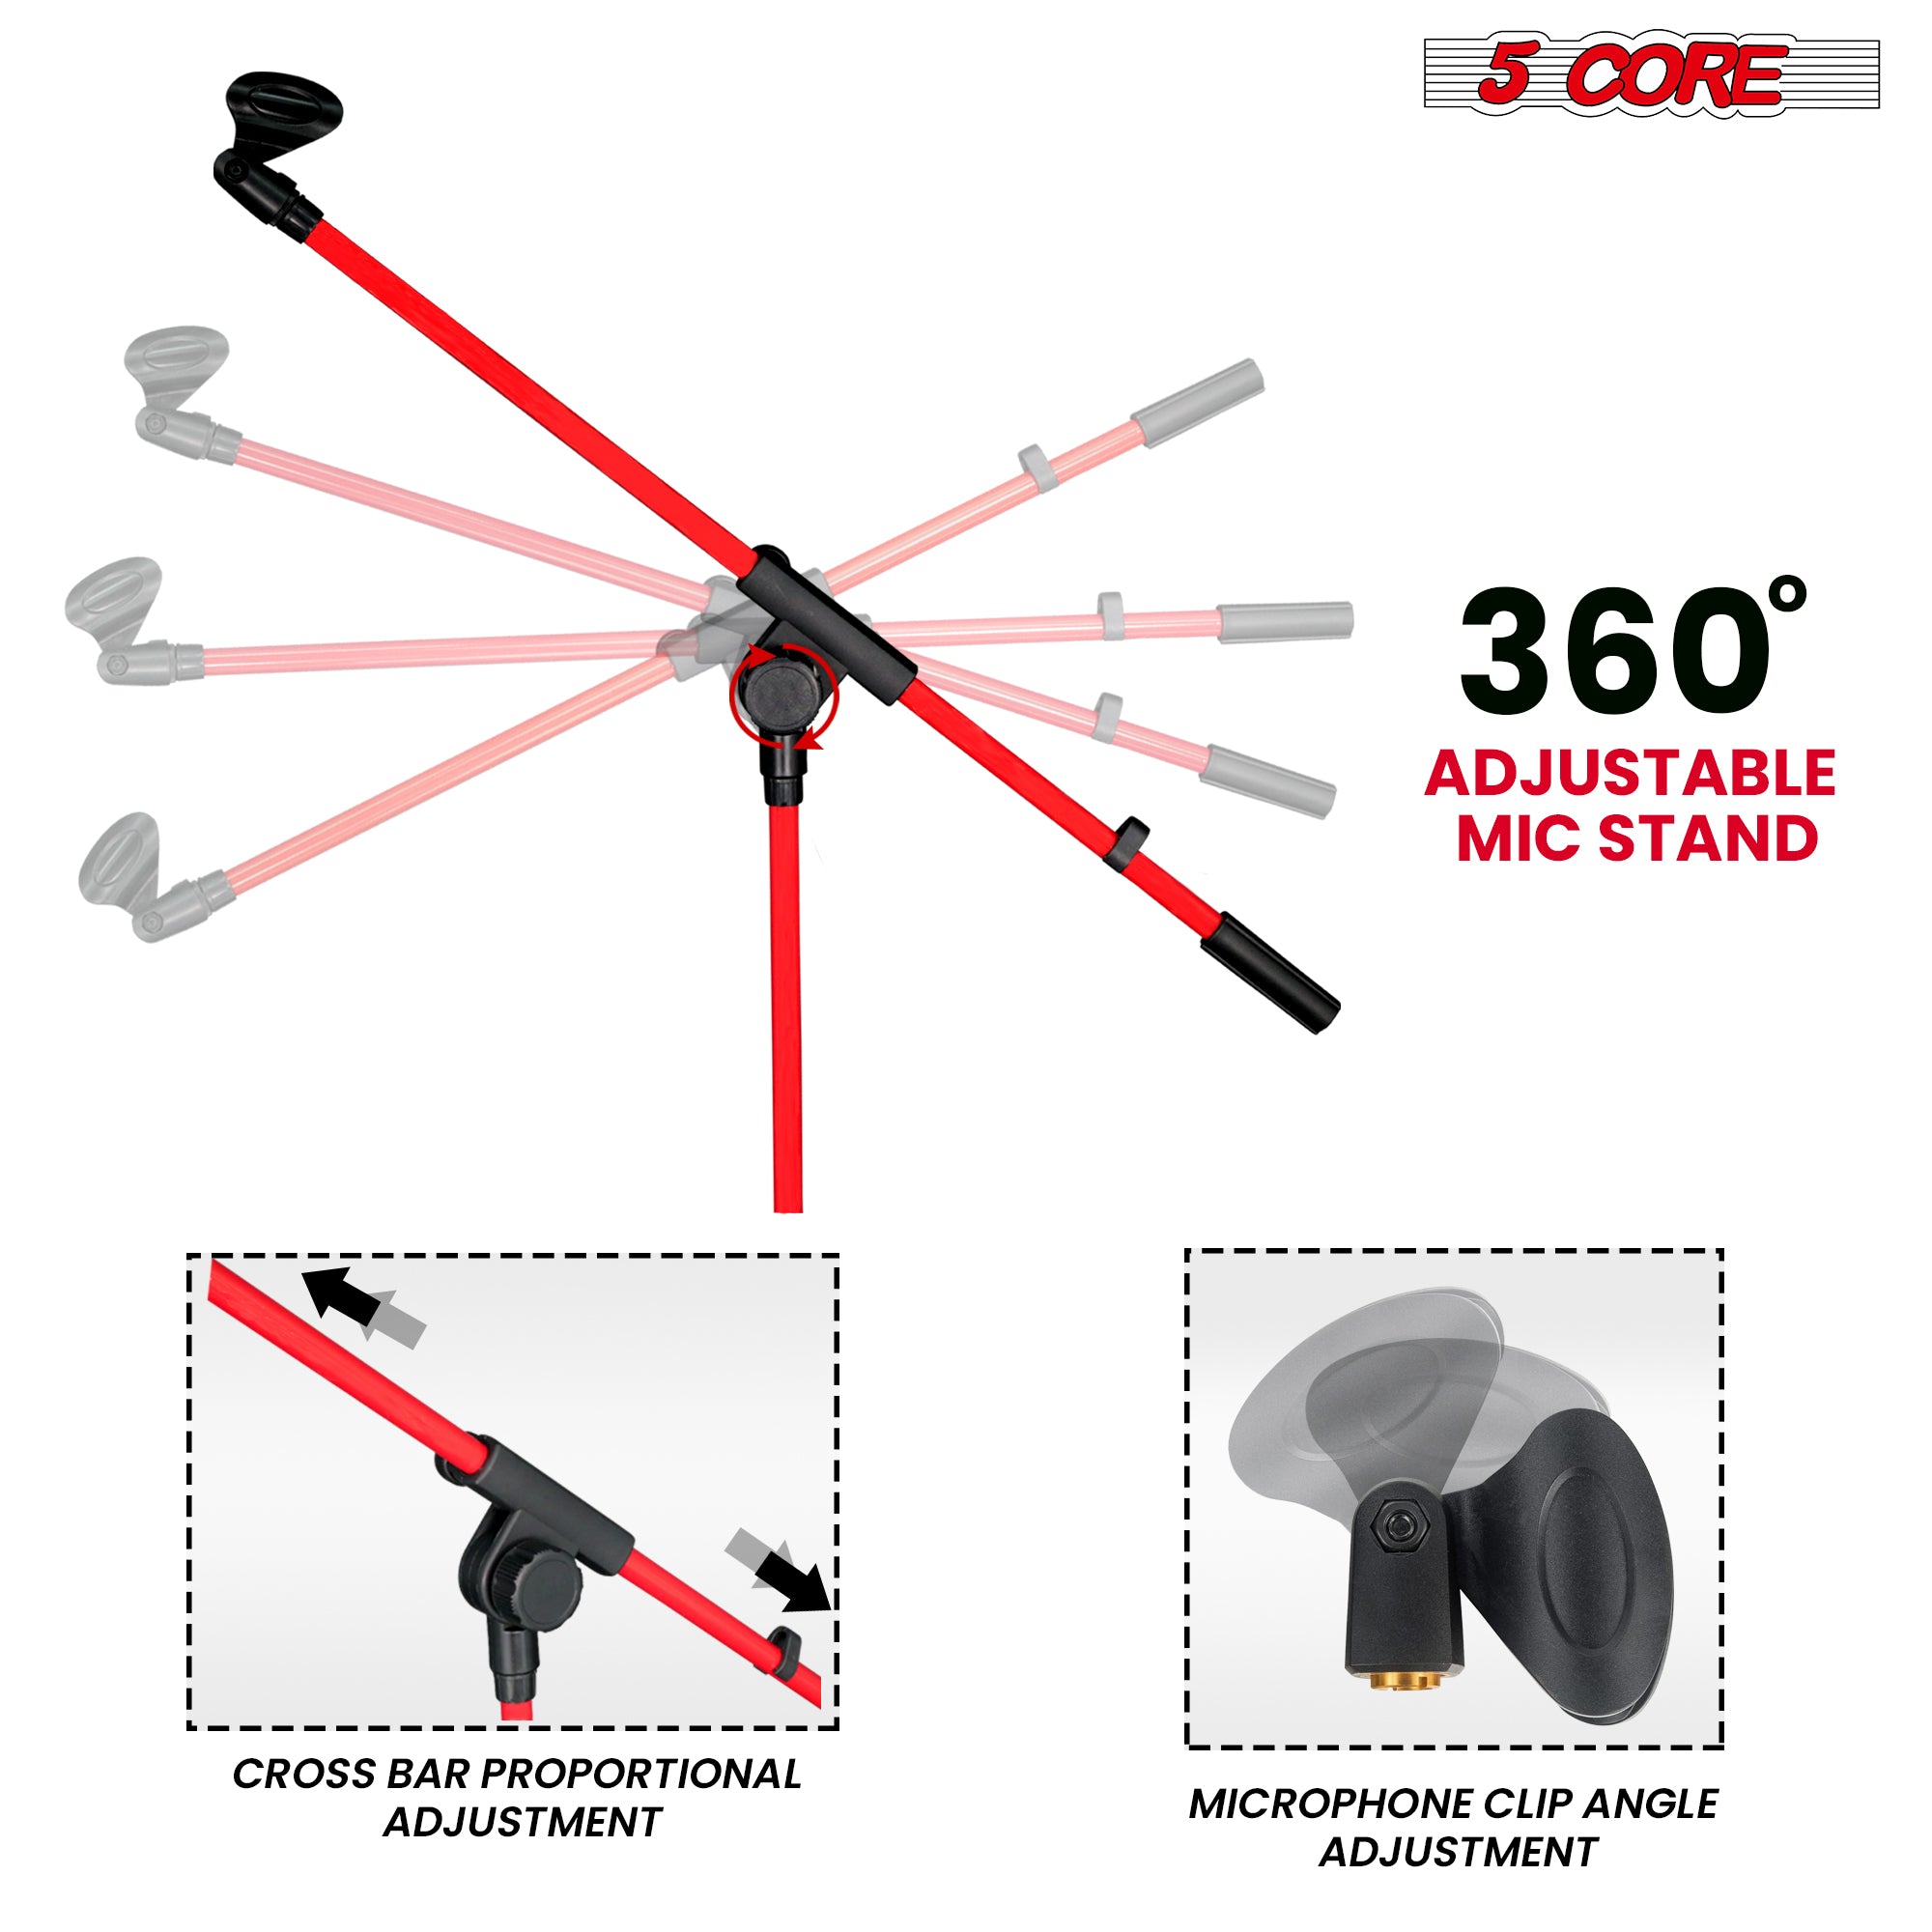 5 Core Mic Stand Red 1 Piece Collapsible Height Adjustable Up to 6ft Metal Microphone Tripod Stand w Boom Arm Para Microfono for Singing Karaoke Speech Stage Recording - MS 080 RED